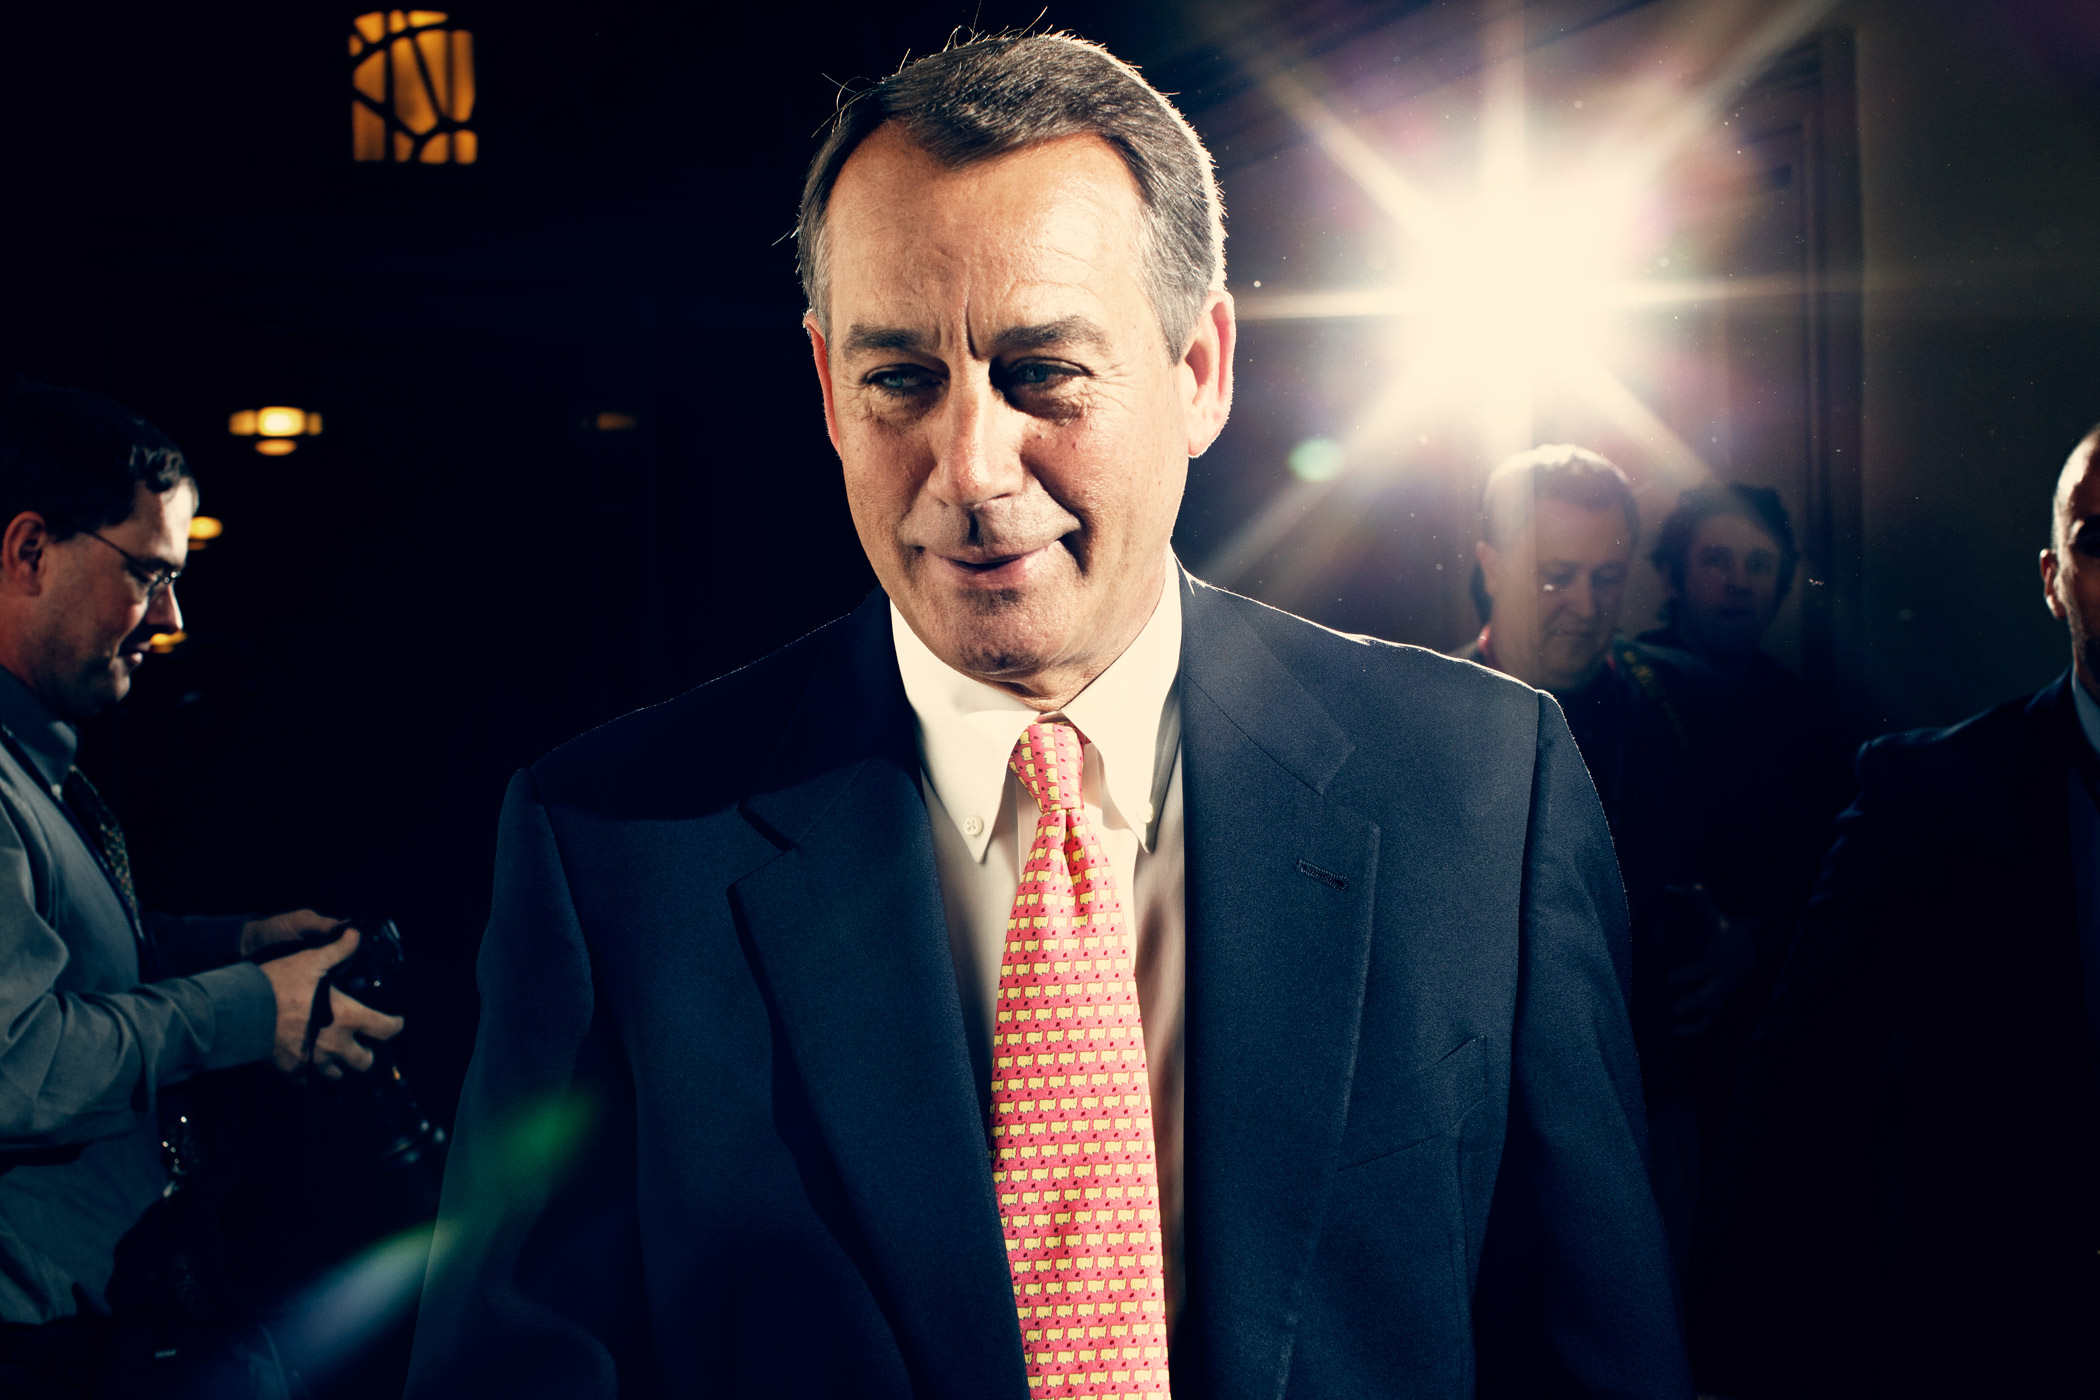 Speaker of the House John Boehner walks out of a meeting at the U.S. Capitol ahead of a potential government shutdown in April 2011 in Washington.